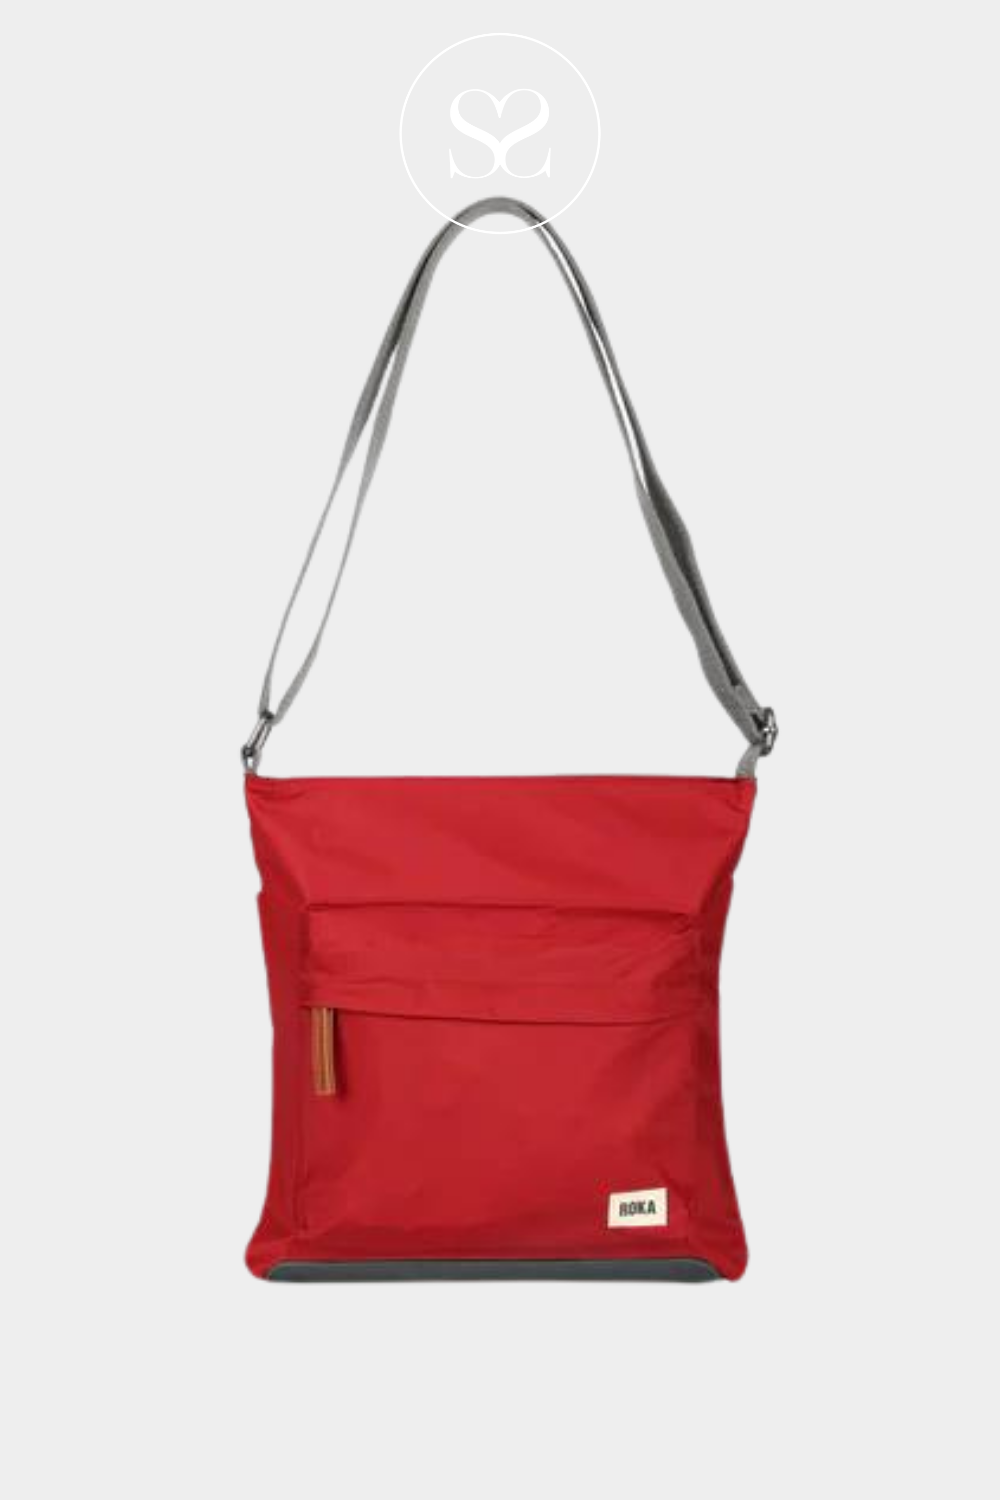 ROKA KENNINGTON WATERPROOF RED CRANBERRY CROSSBODY BAGS WITH FRONT ZIPPED POCKET